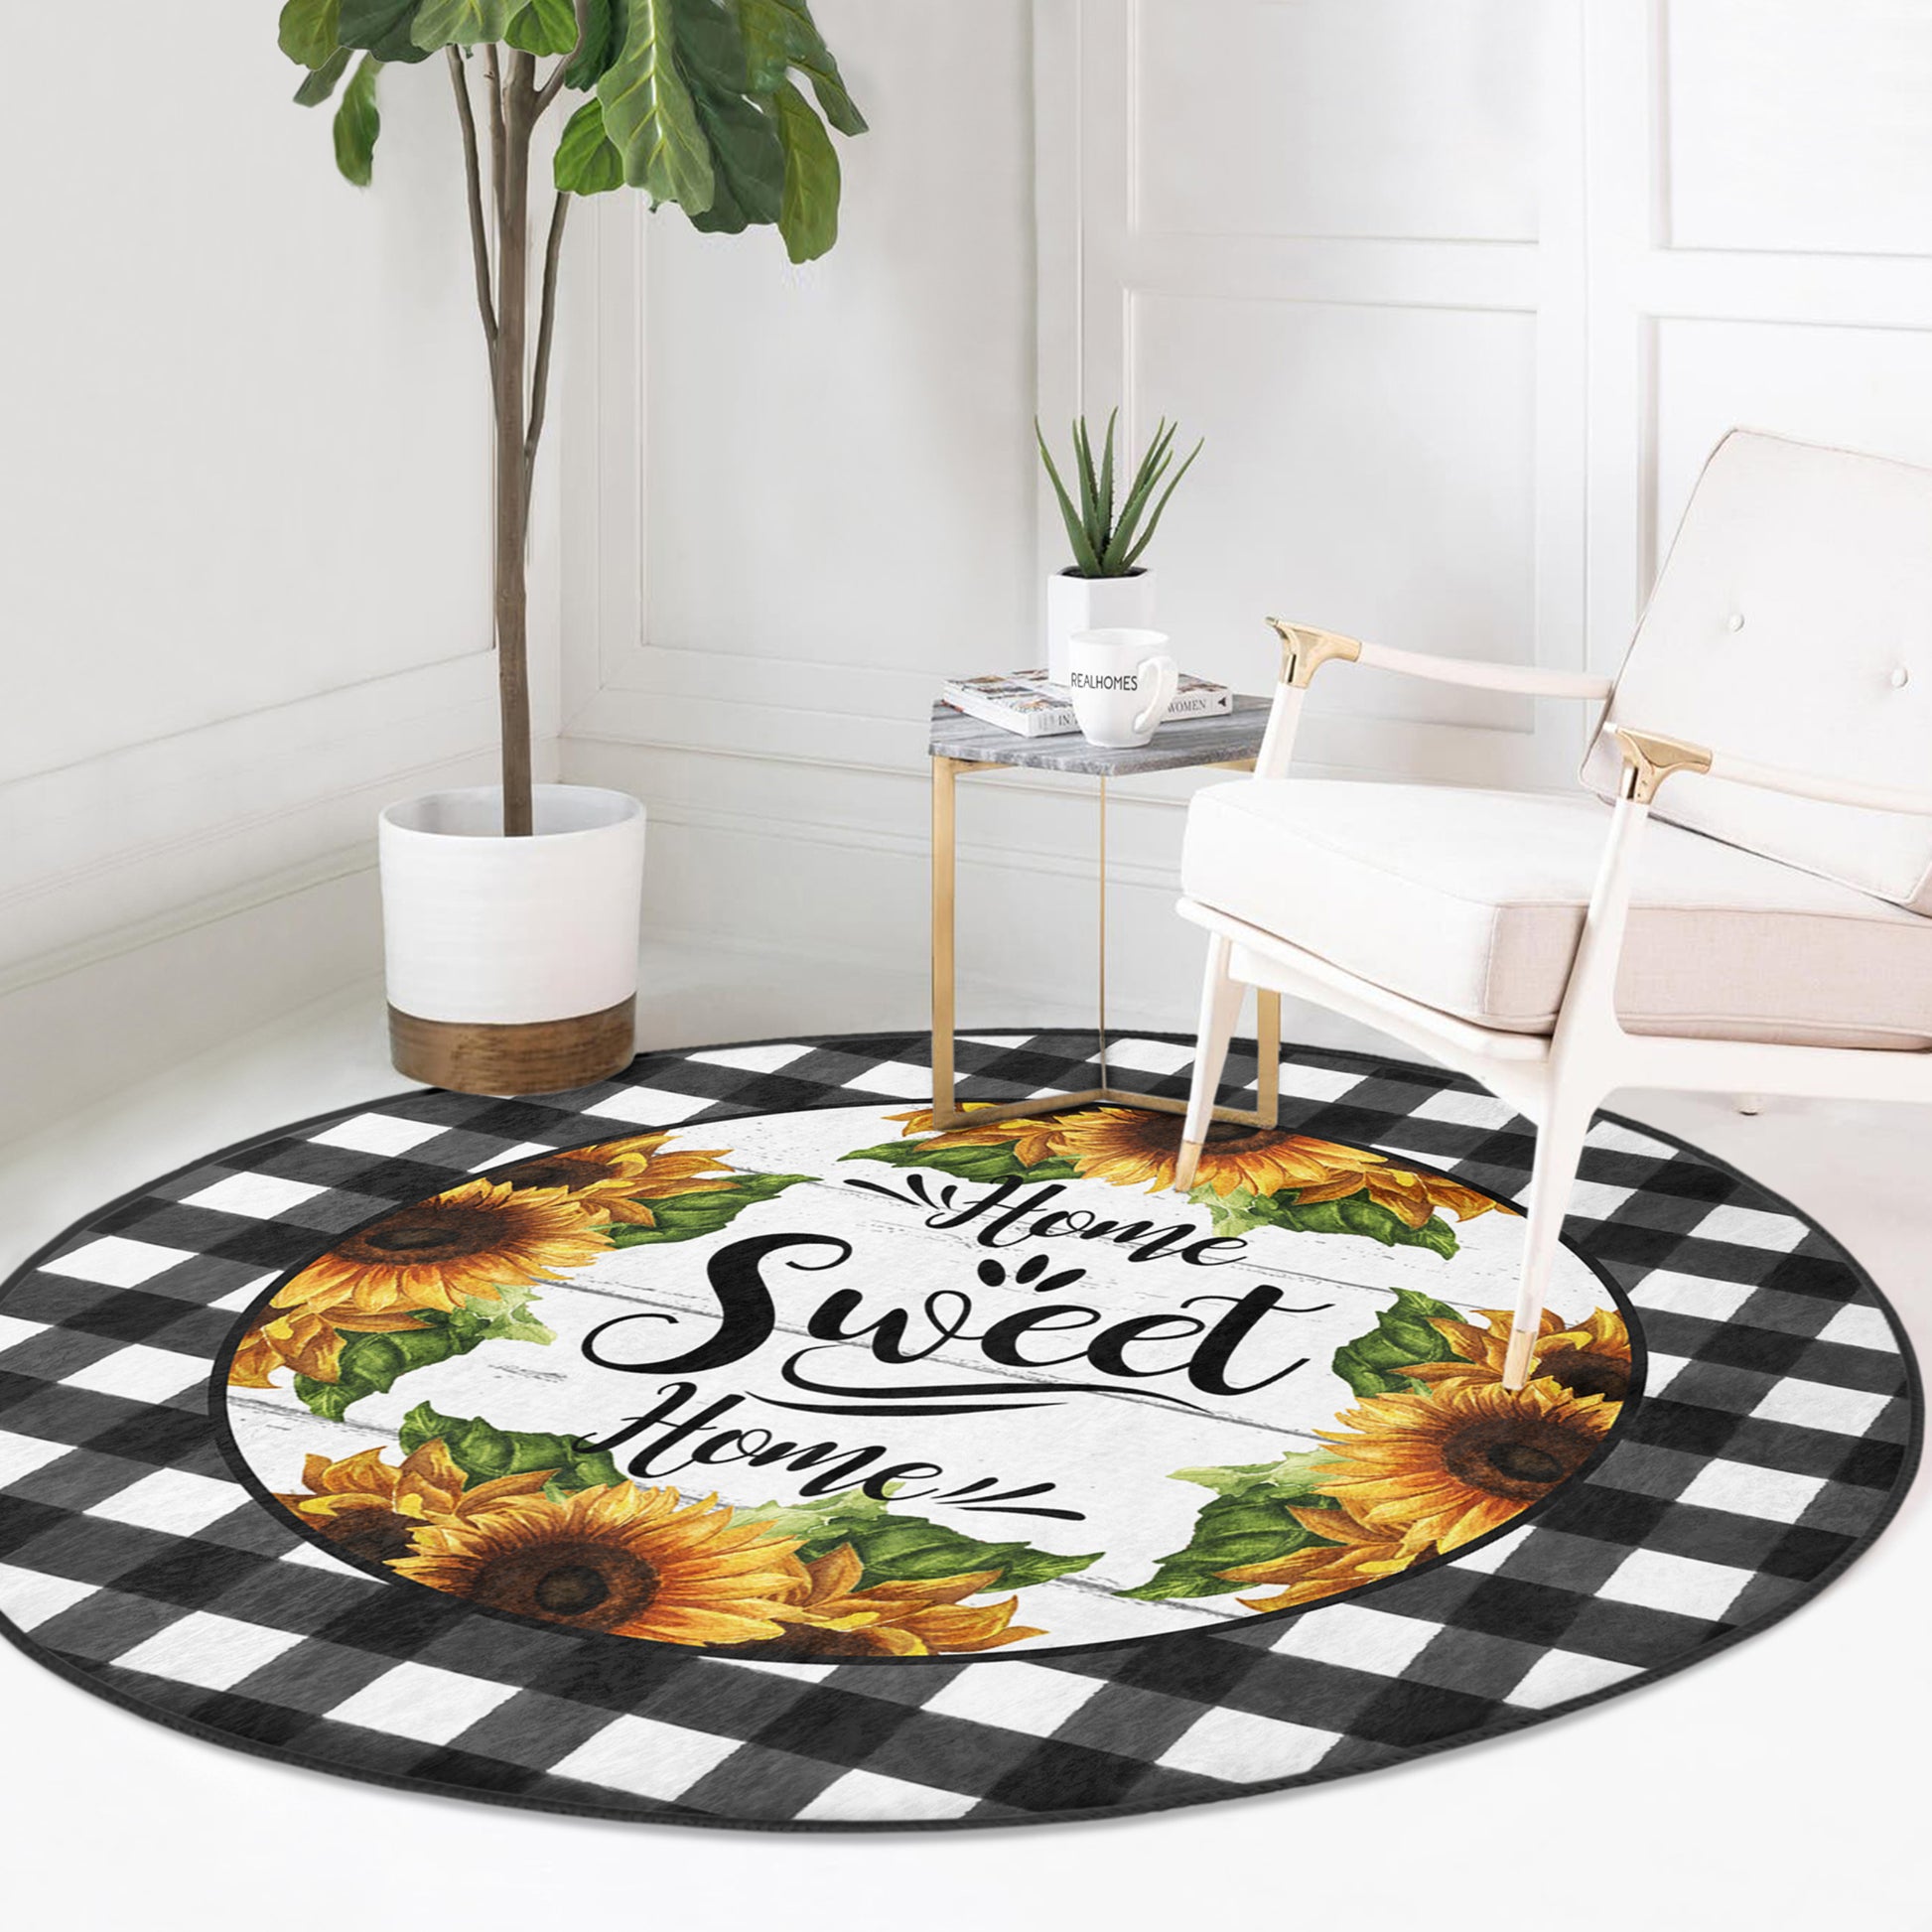 Charming Home Sweet Home Rug by Homeezone